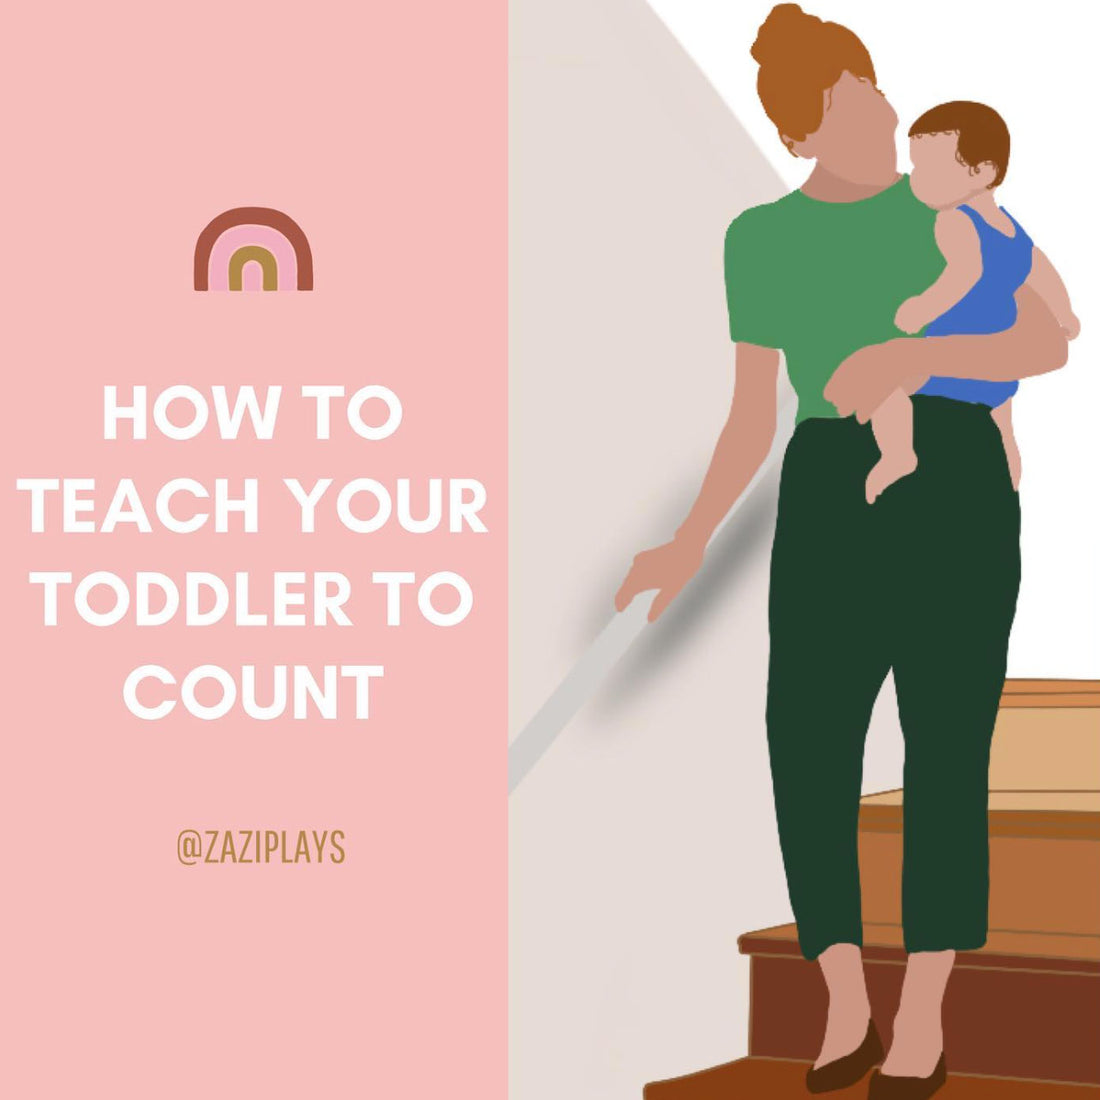 How to teach your toddler to count